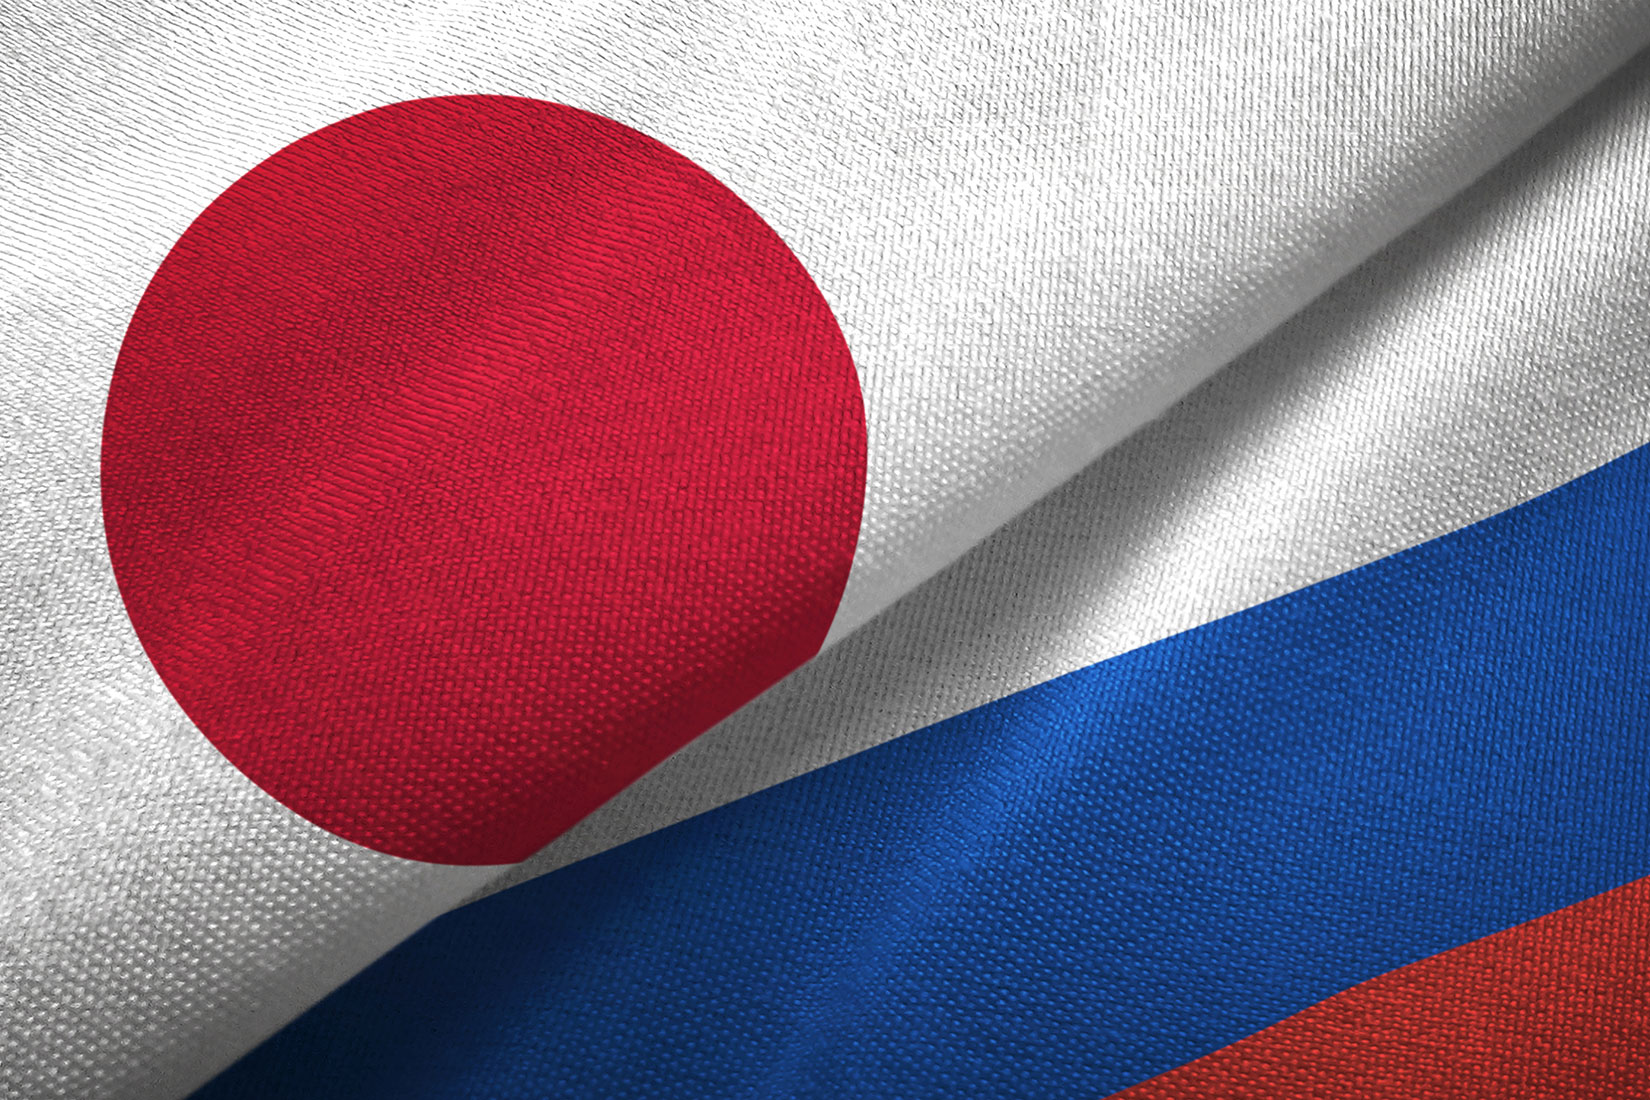 Russian Military Modernization in the Northern Territories and Its Implications for Japanese Foreign Policy